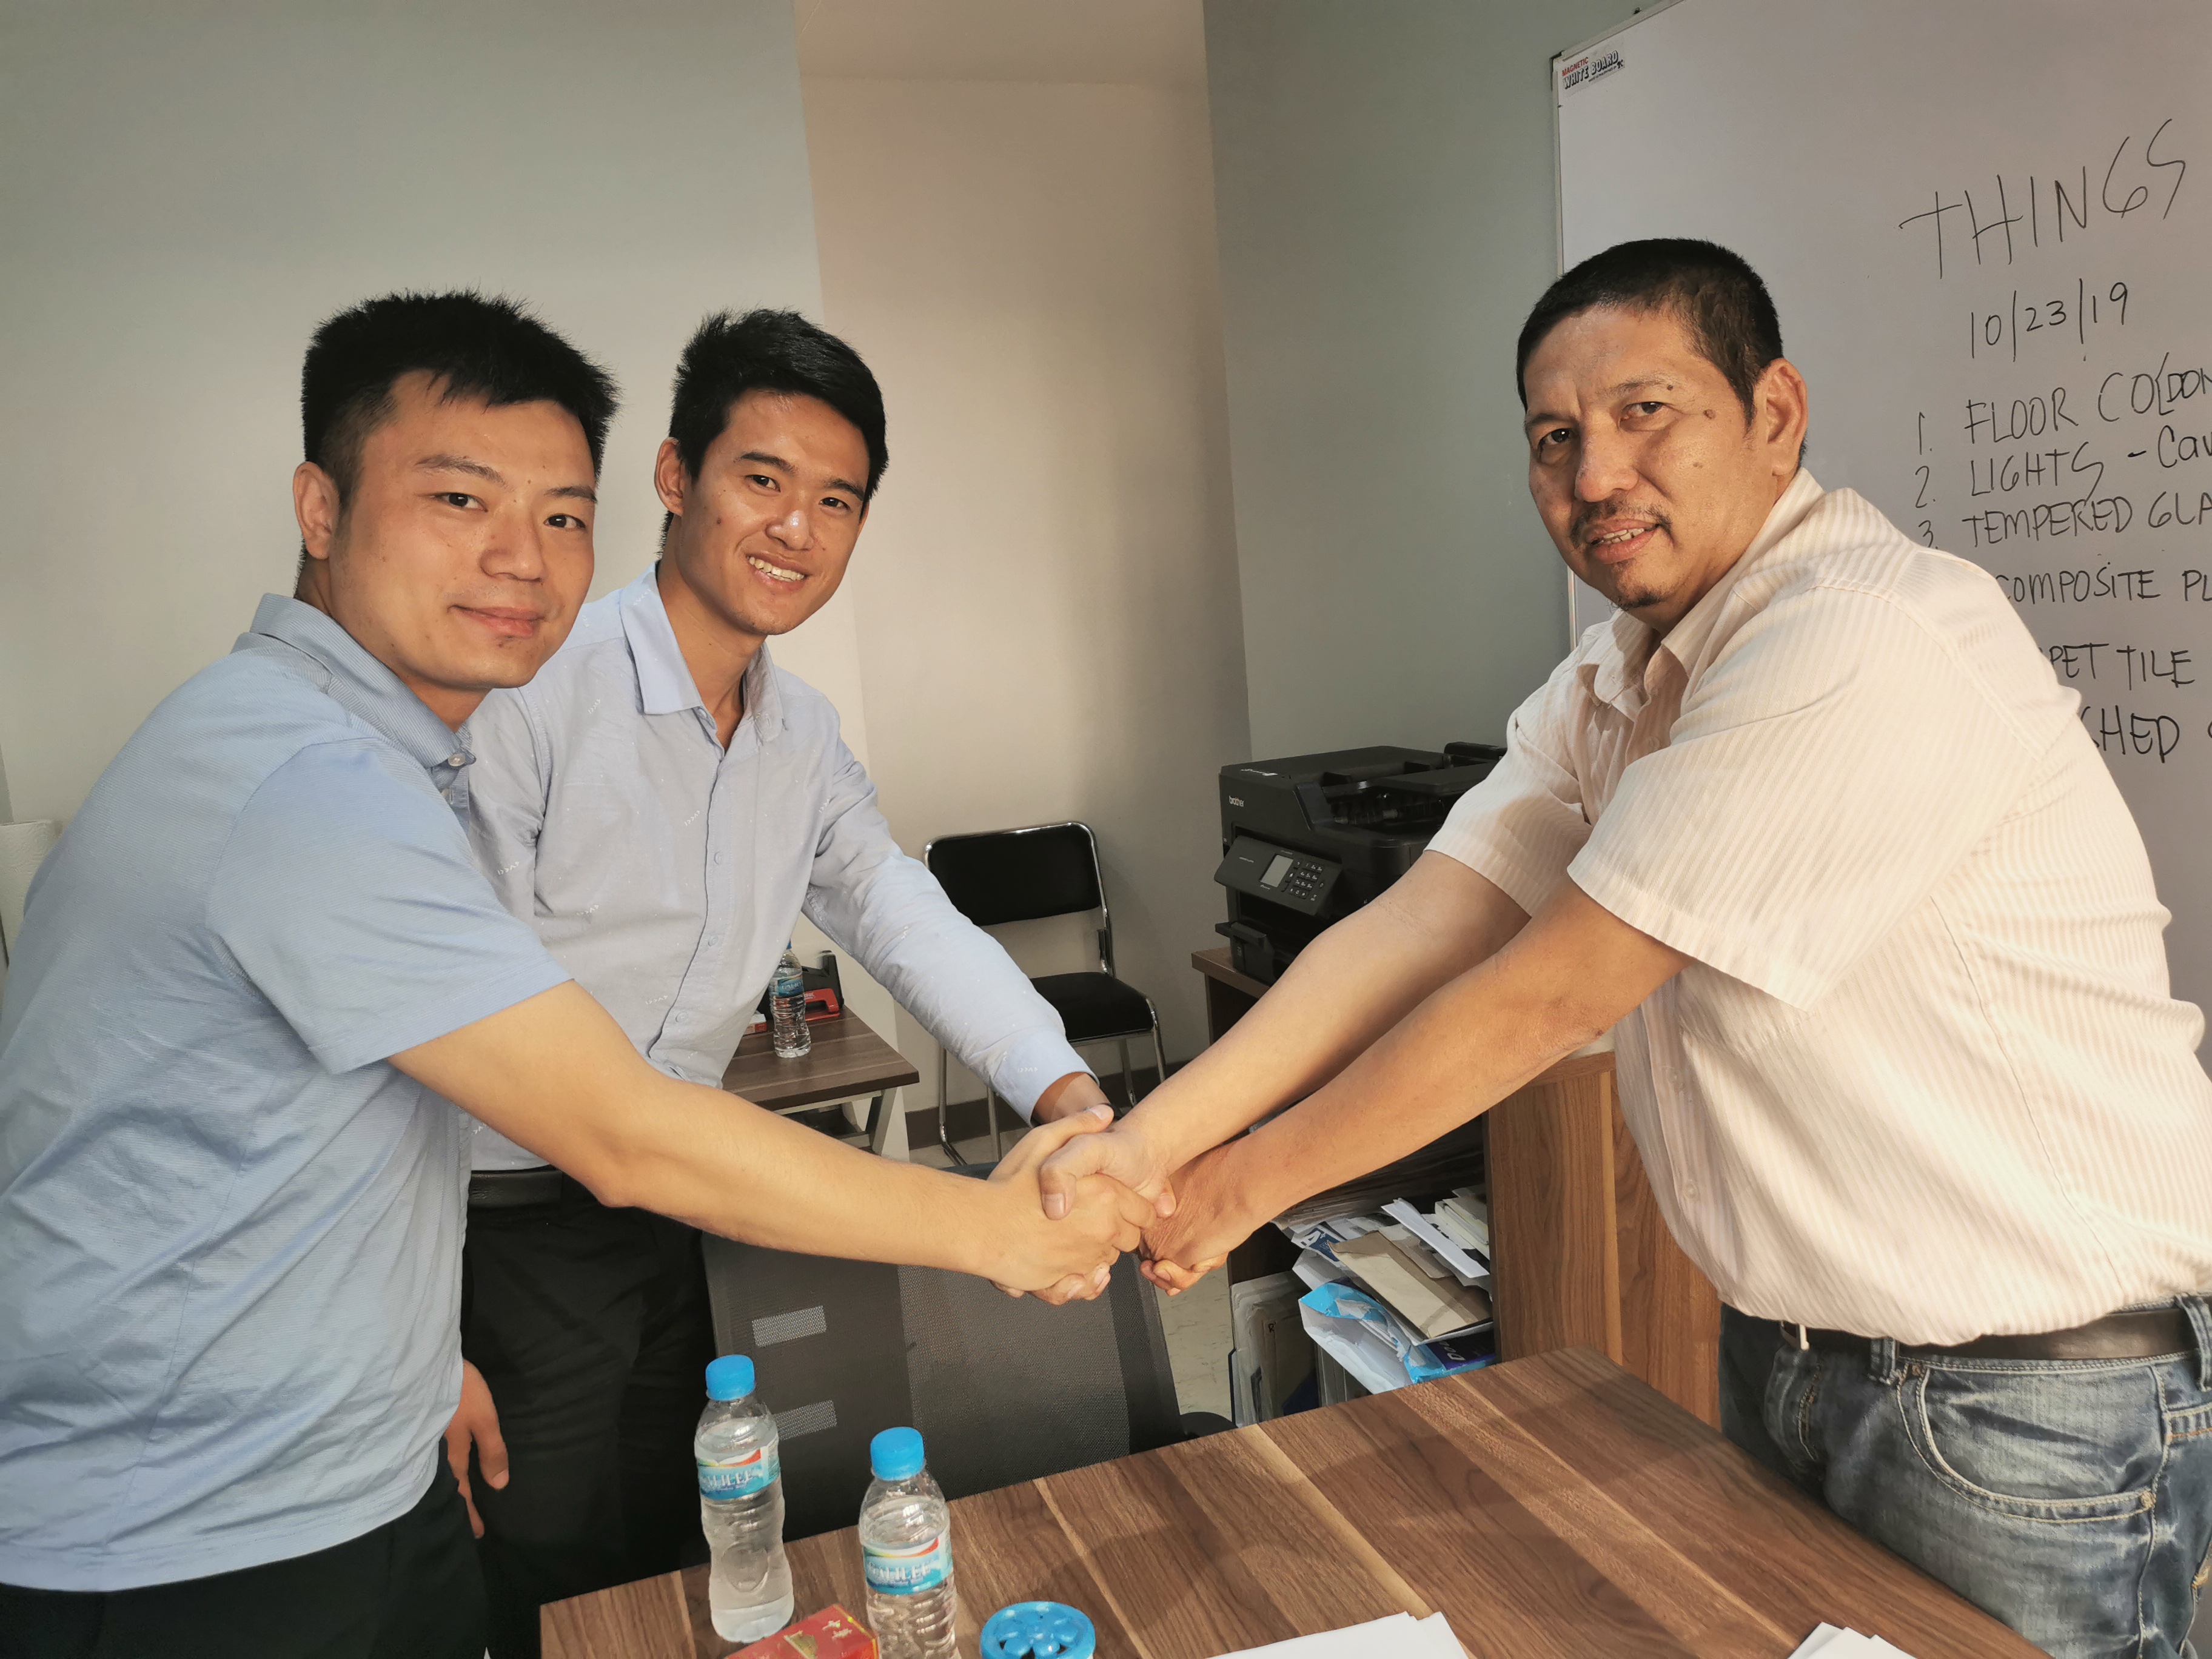 On May 7th, 2019,Visits from Malaysian clients